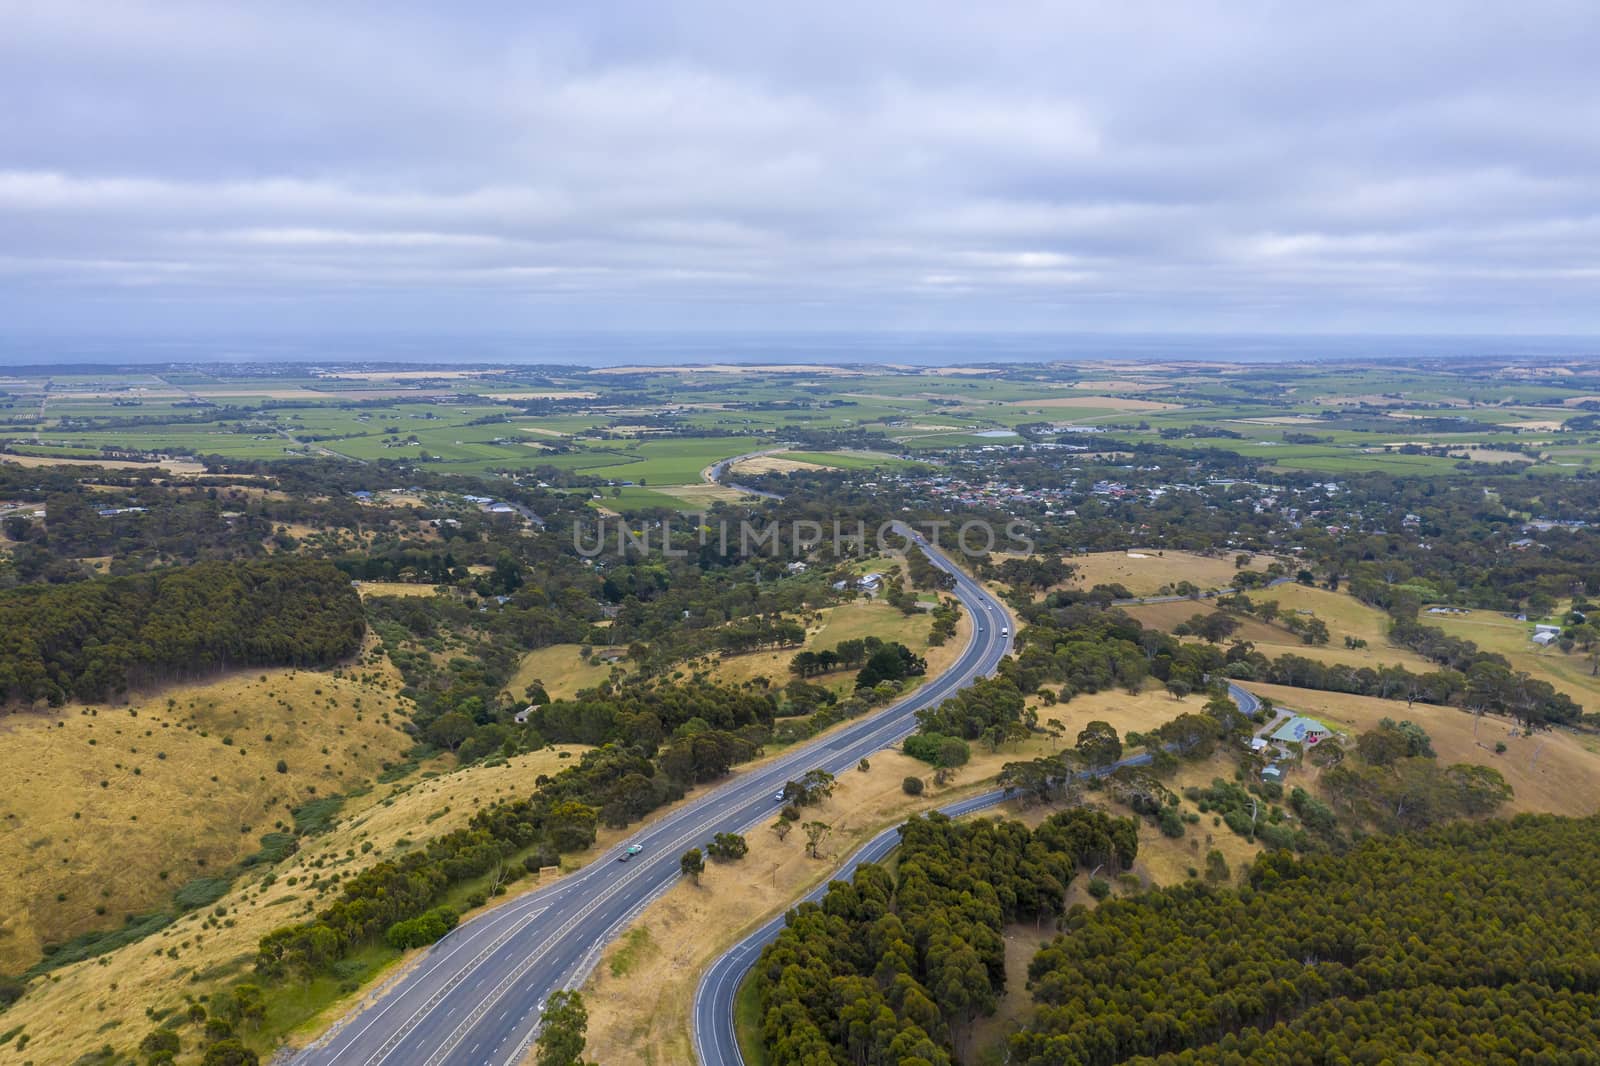 Aerial view of an arterial road system in regional Australia by WittkePhotos